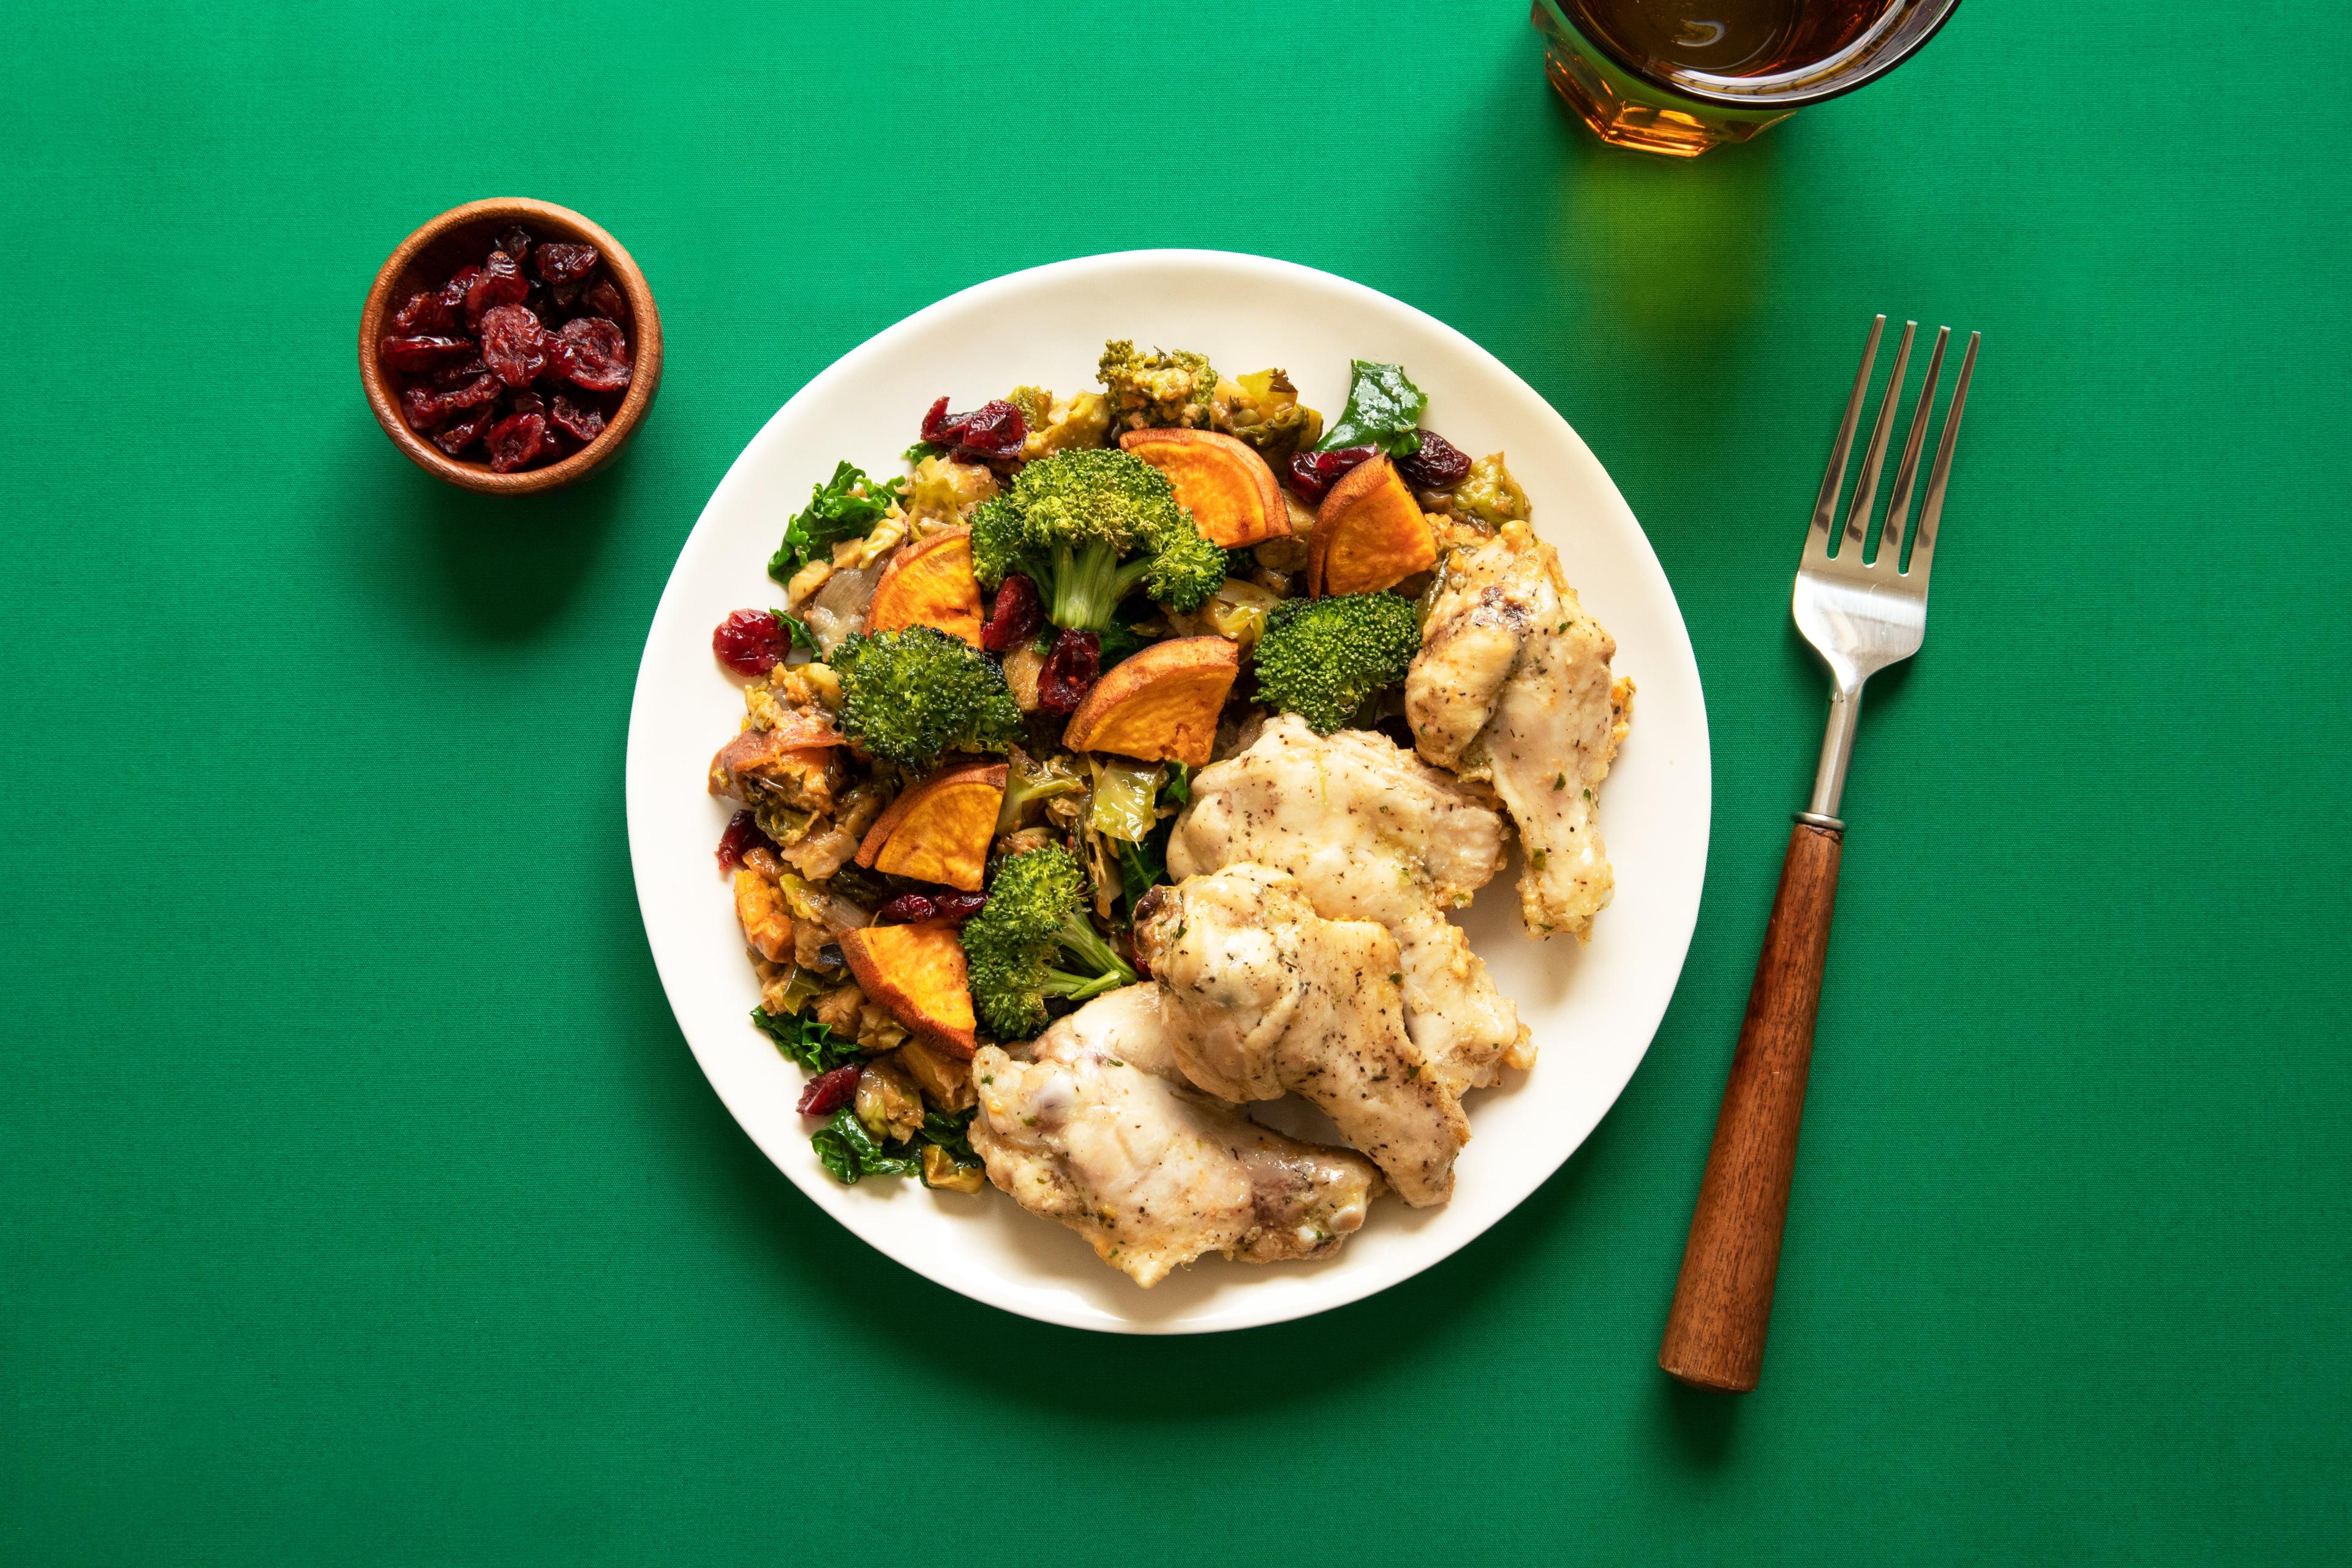 A plate of chicken and vegetables on a green background